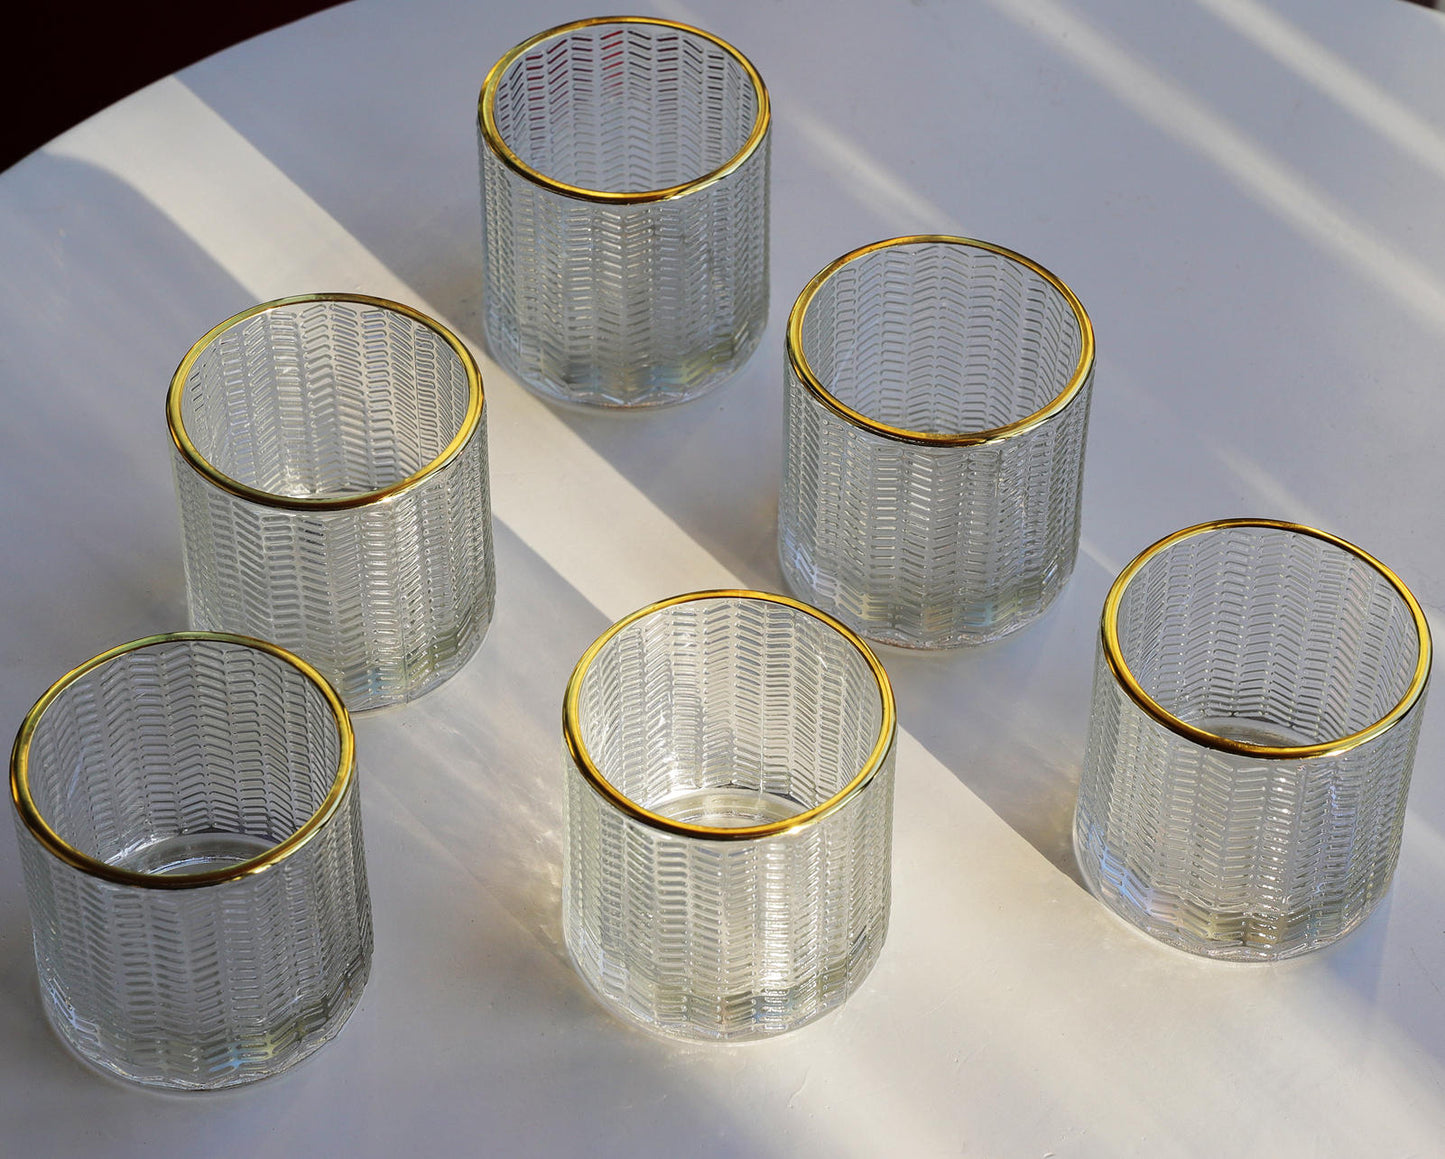 VOHO Votive Candle Holders Set of 6 with Gold Rim, Clear Tealight Candle Holder Bulk for Wedding Party, Glass Votive Candle Holders for Centerpiece Decoration(Clear, 2.75'' x 2.75'') - vohocandle